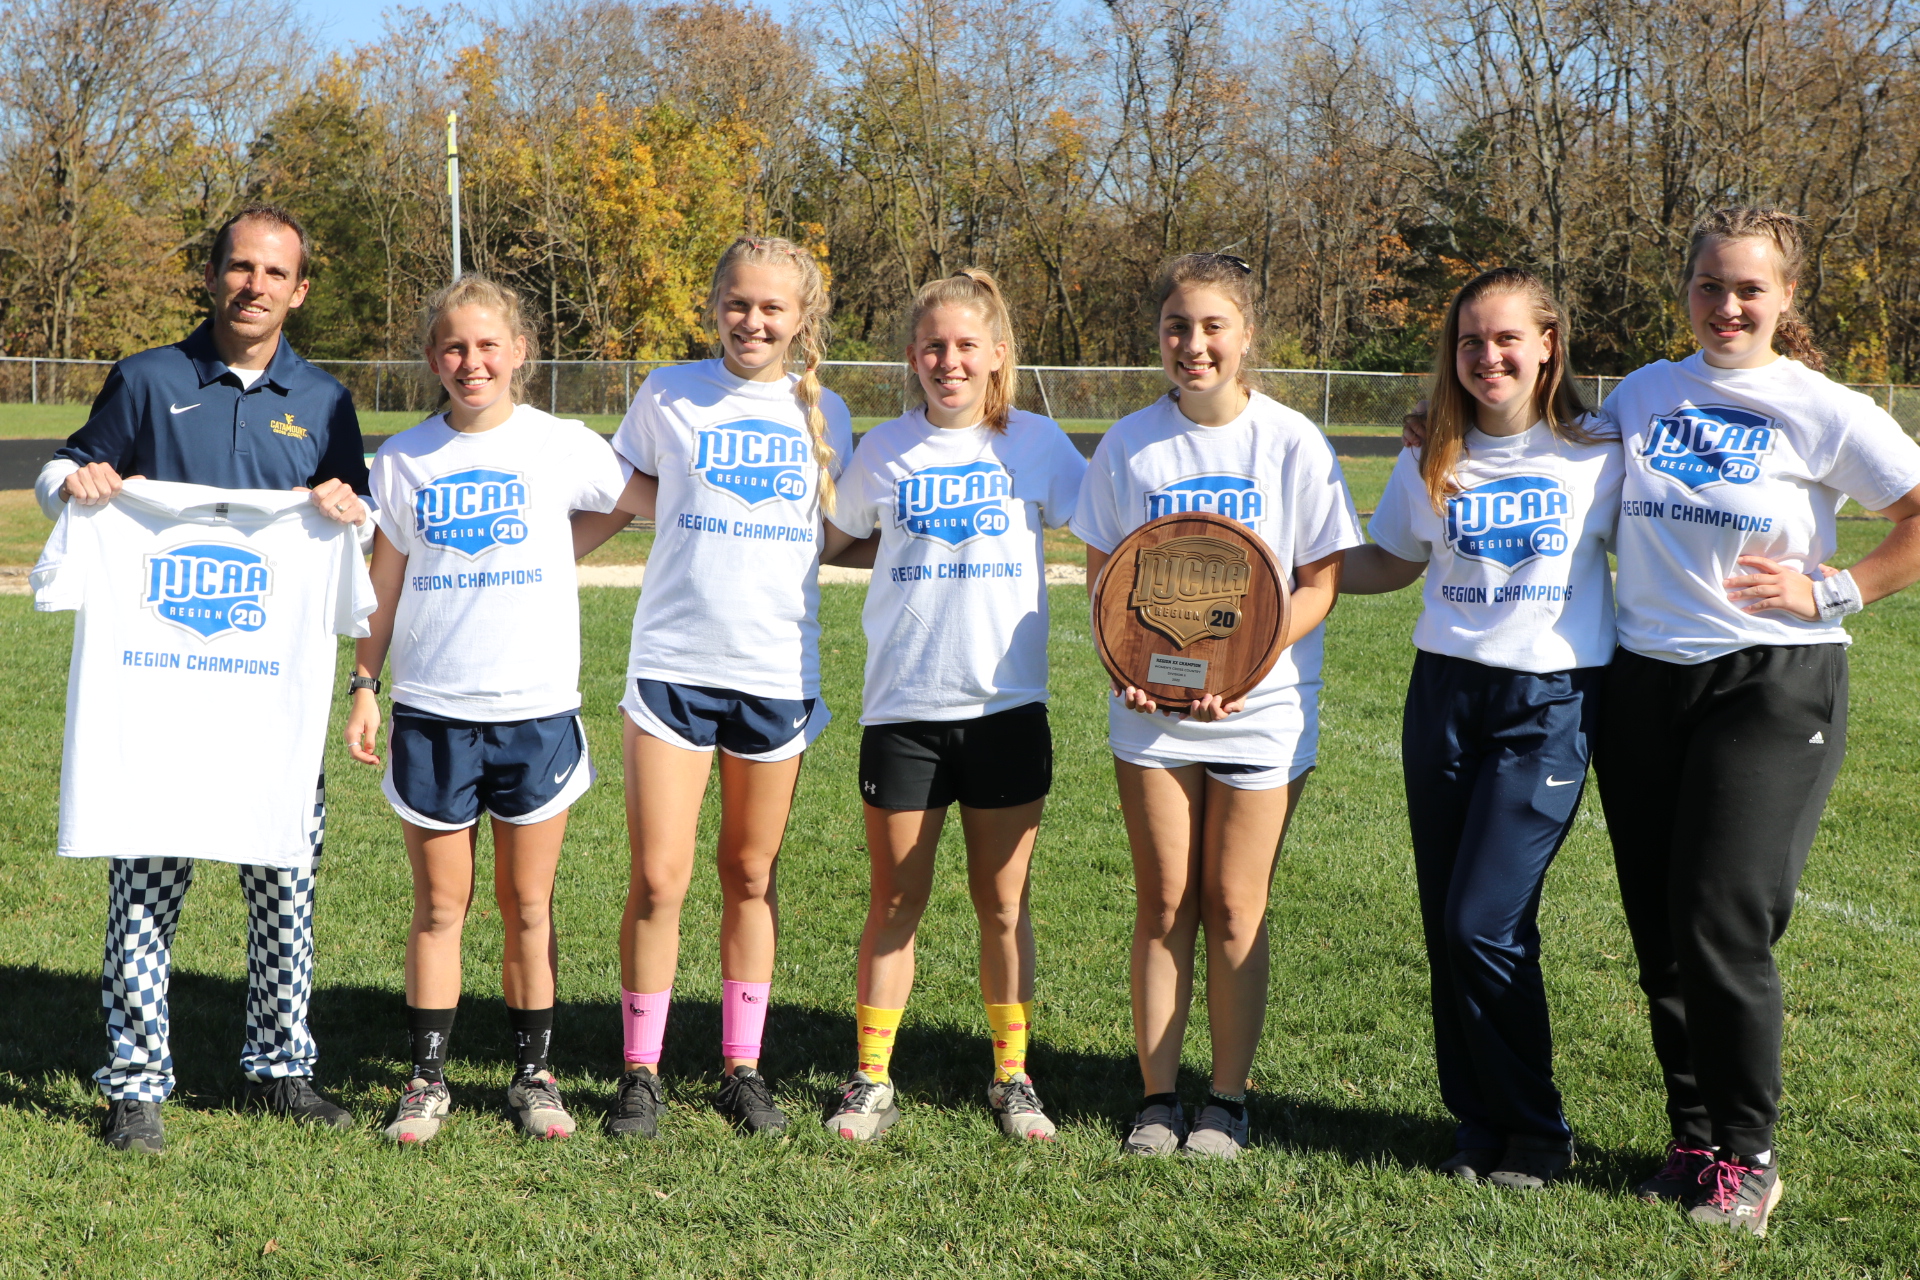 WVU Potomac State Women Claim Division II Cross Country Title